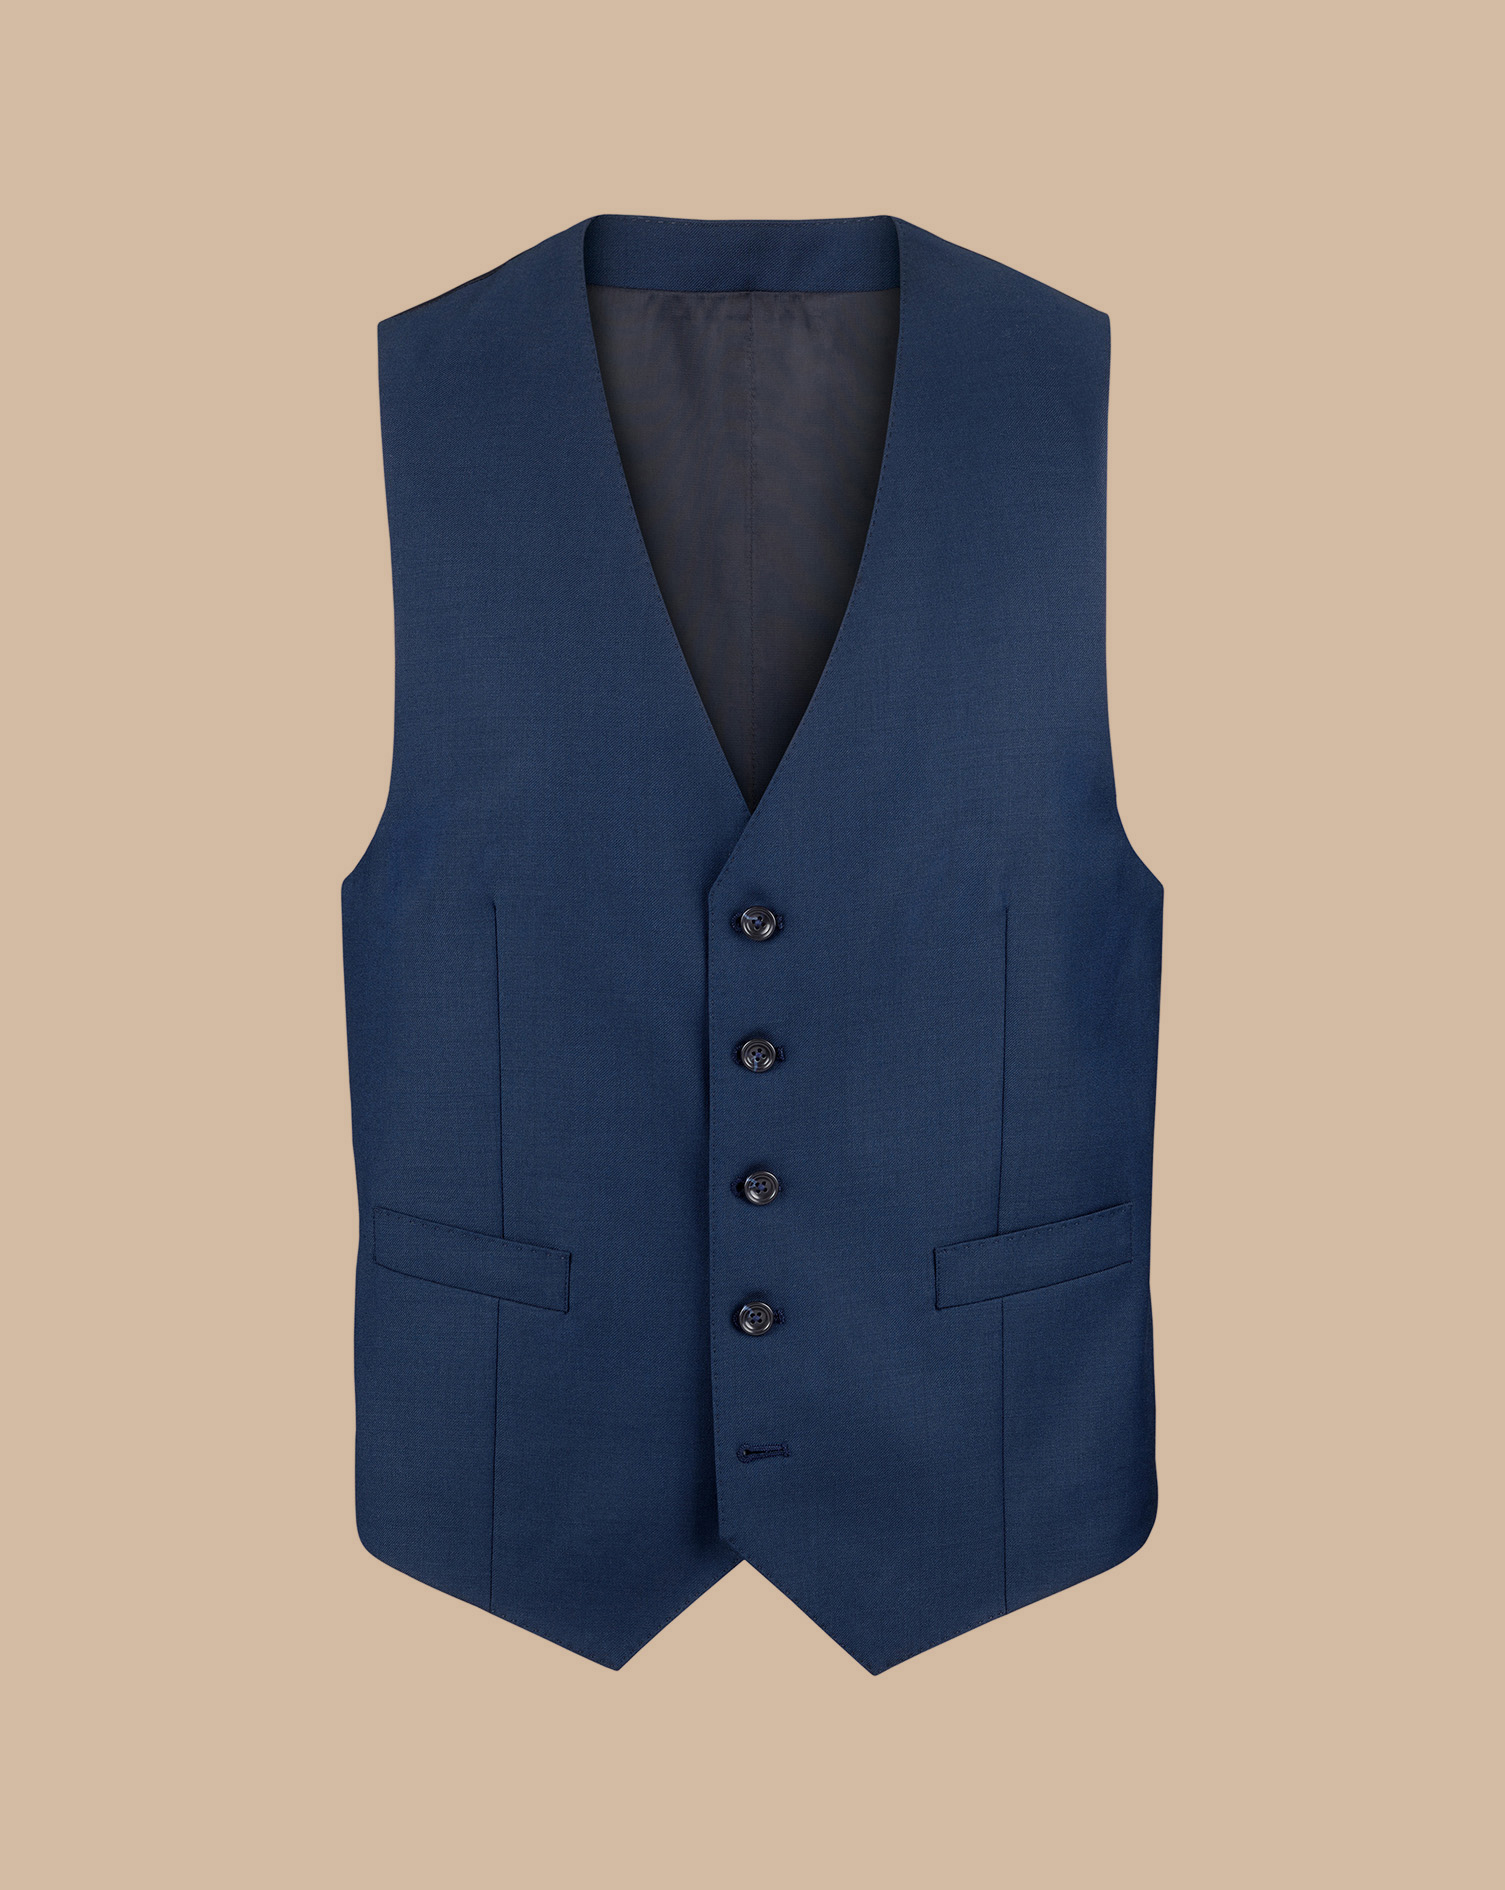 Men's Charles Tyrwhitt Natural Stretch Twill Suit Waistcoat - Royal Blue Size w38 Wool
